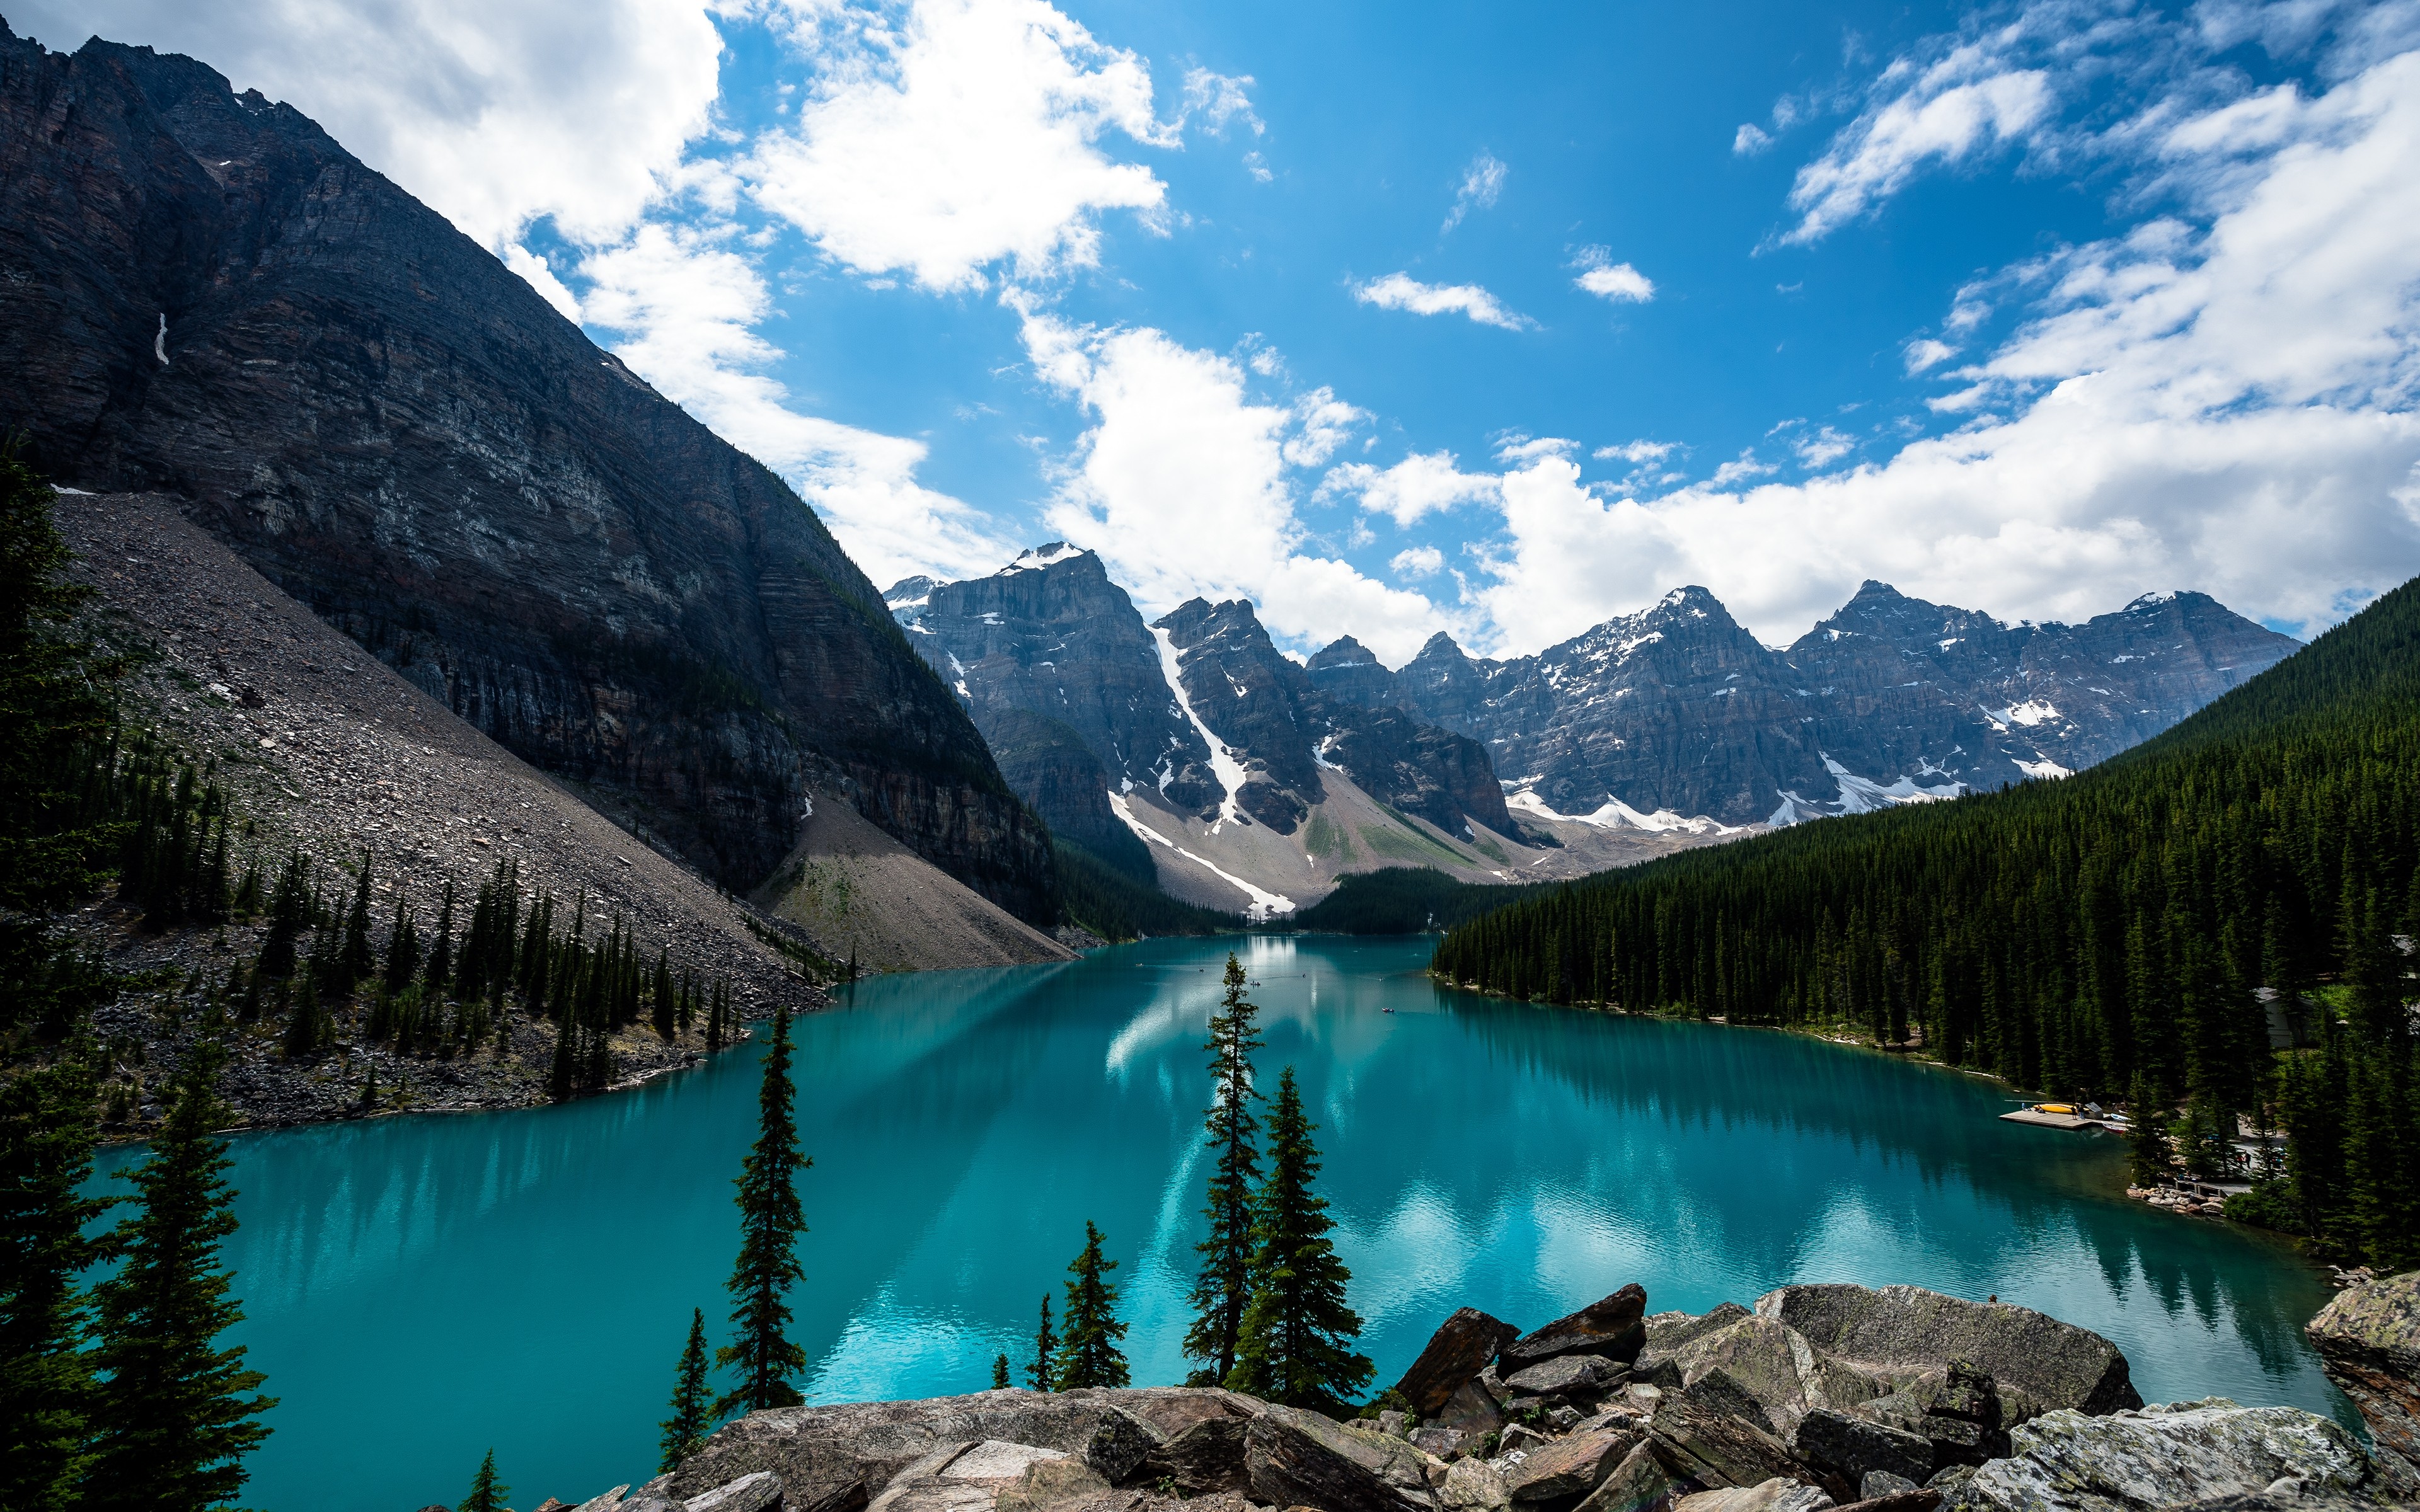 mountains, Clouds, Landscapes, Nature, Trees, Rocks, Canada, Alberta, Lakes, Lake, Luise Wallpaper